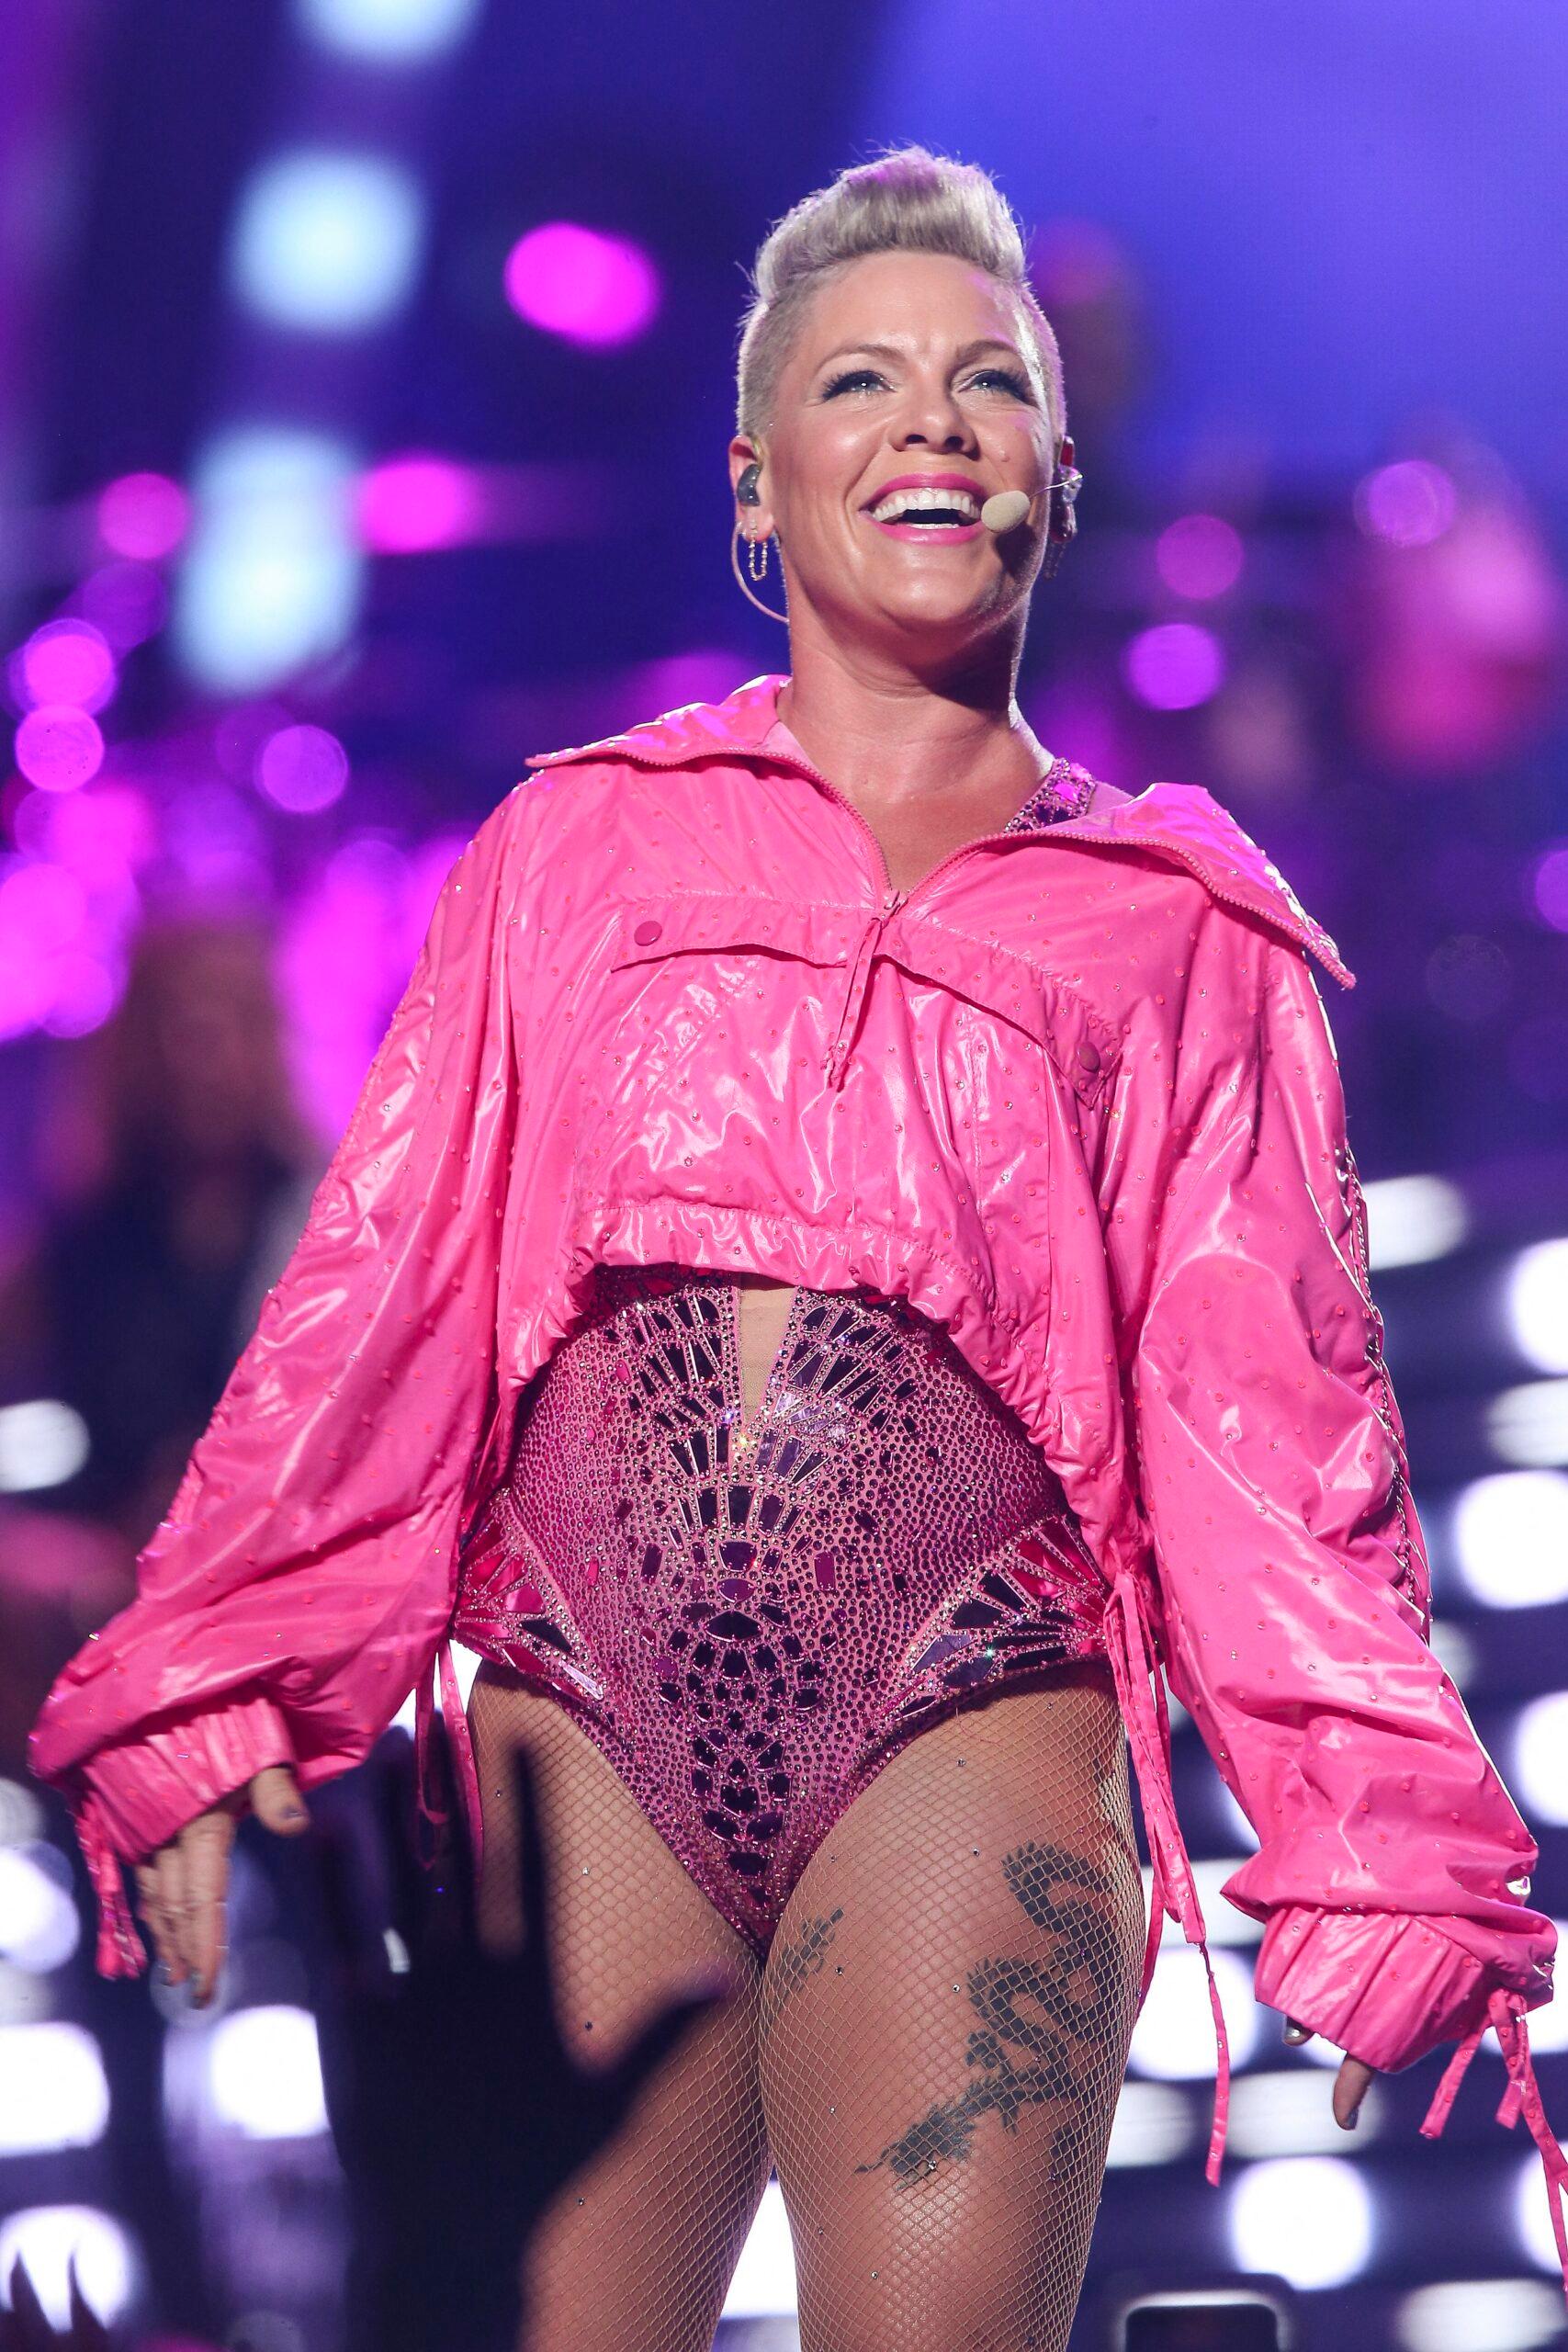 P!nk Receives Backlash For Being 'Entitled' After Latest Announcement